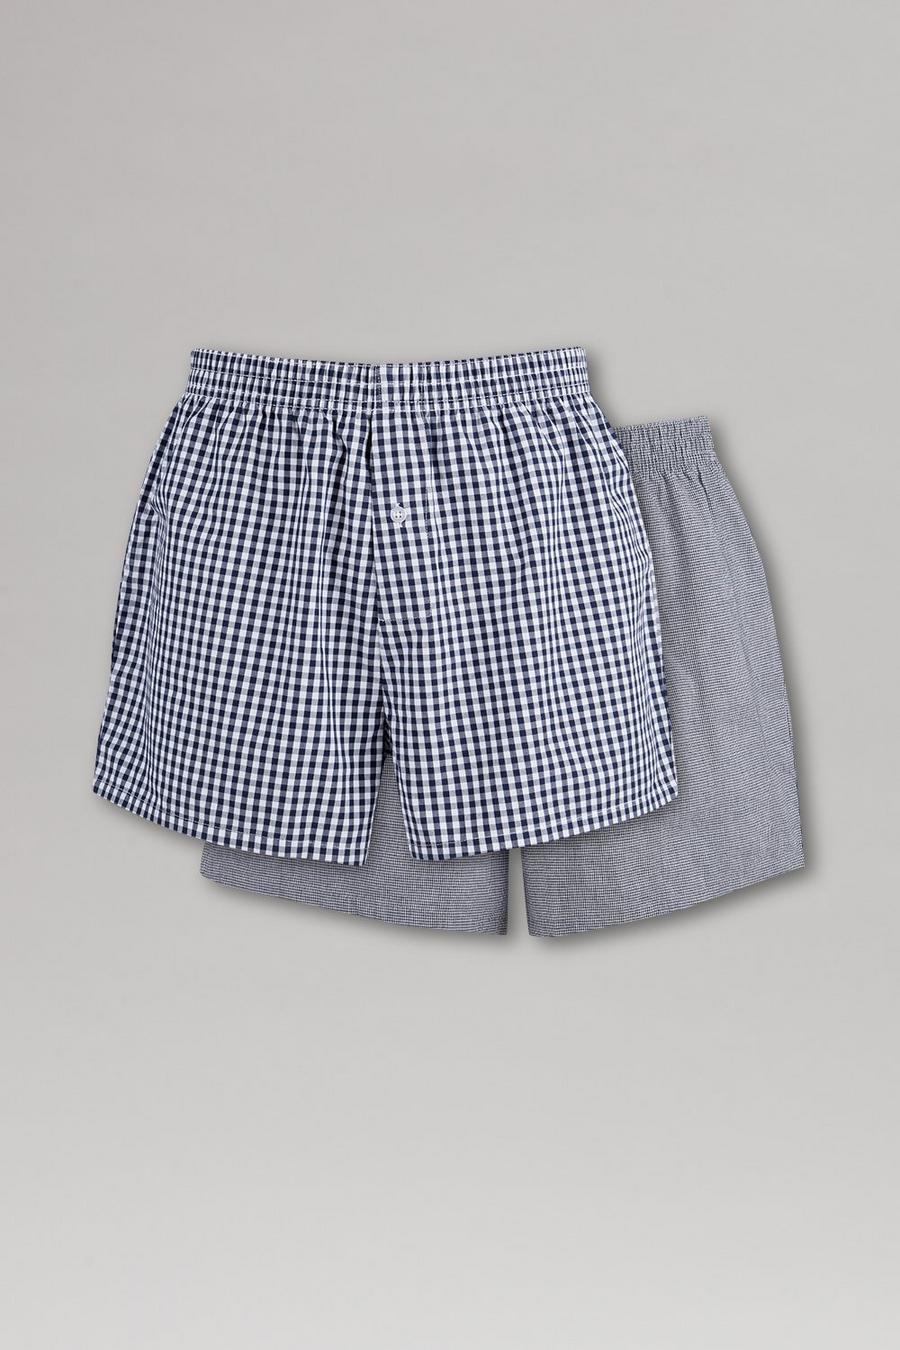 2  Pack Woven Navy Gingham Boxers